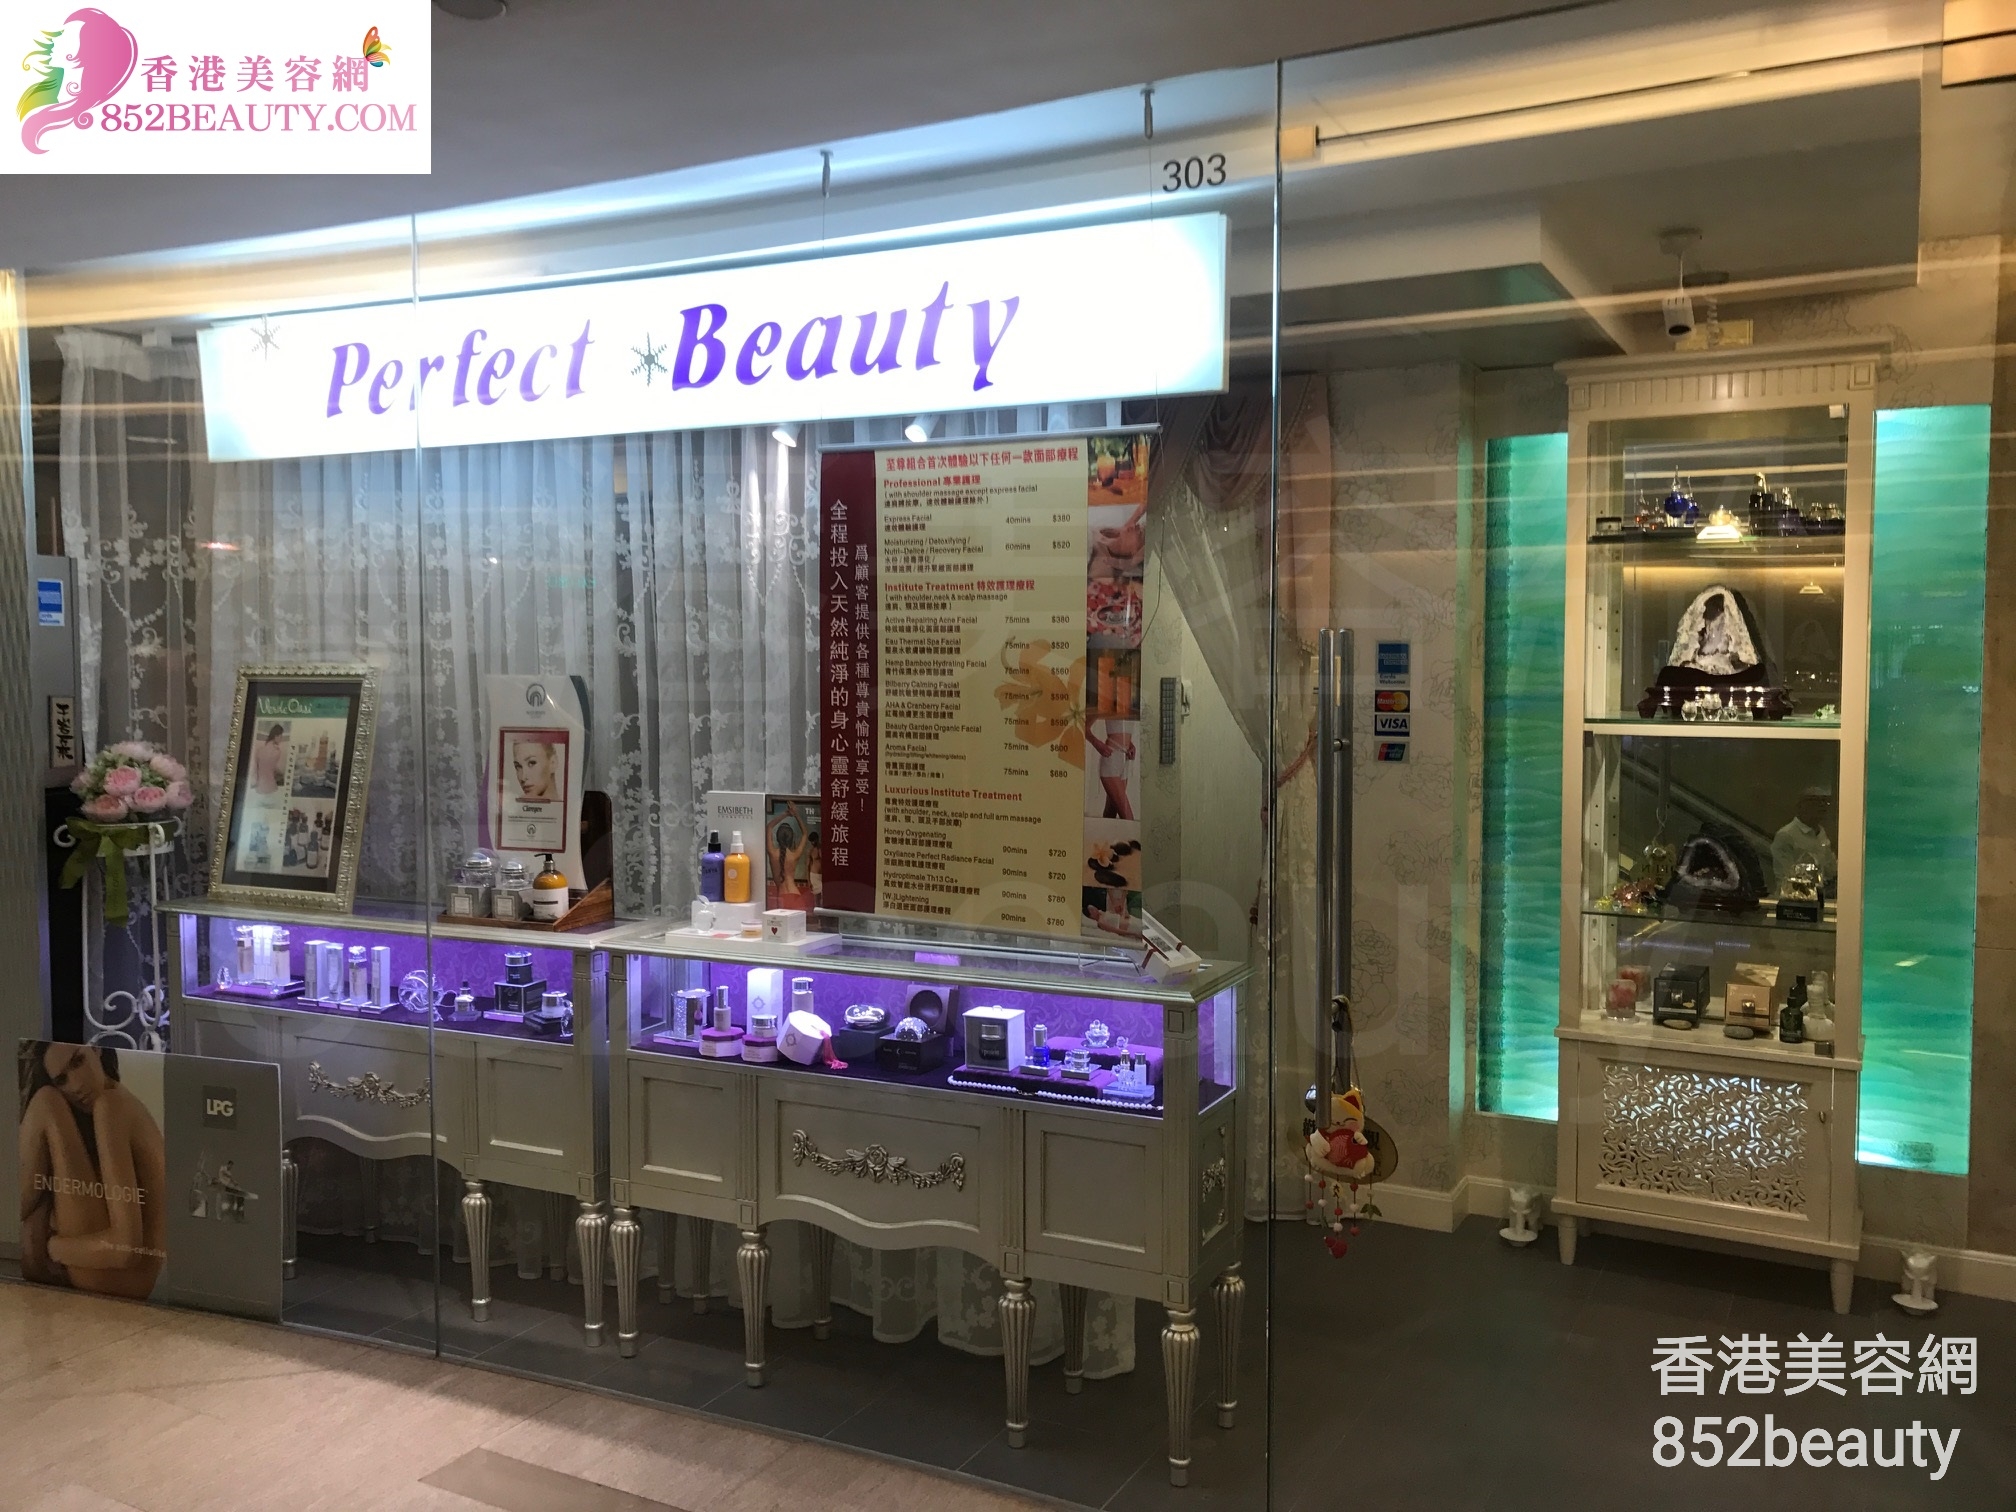 Hand and foot care: Perfect Beauty